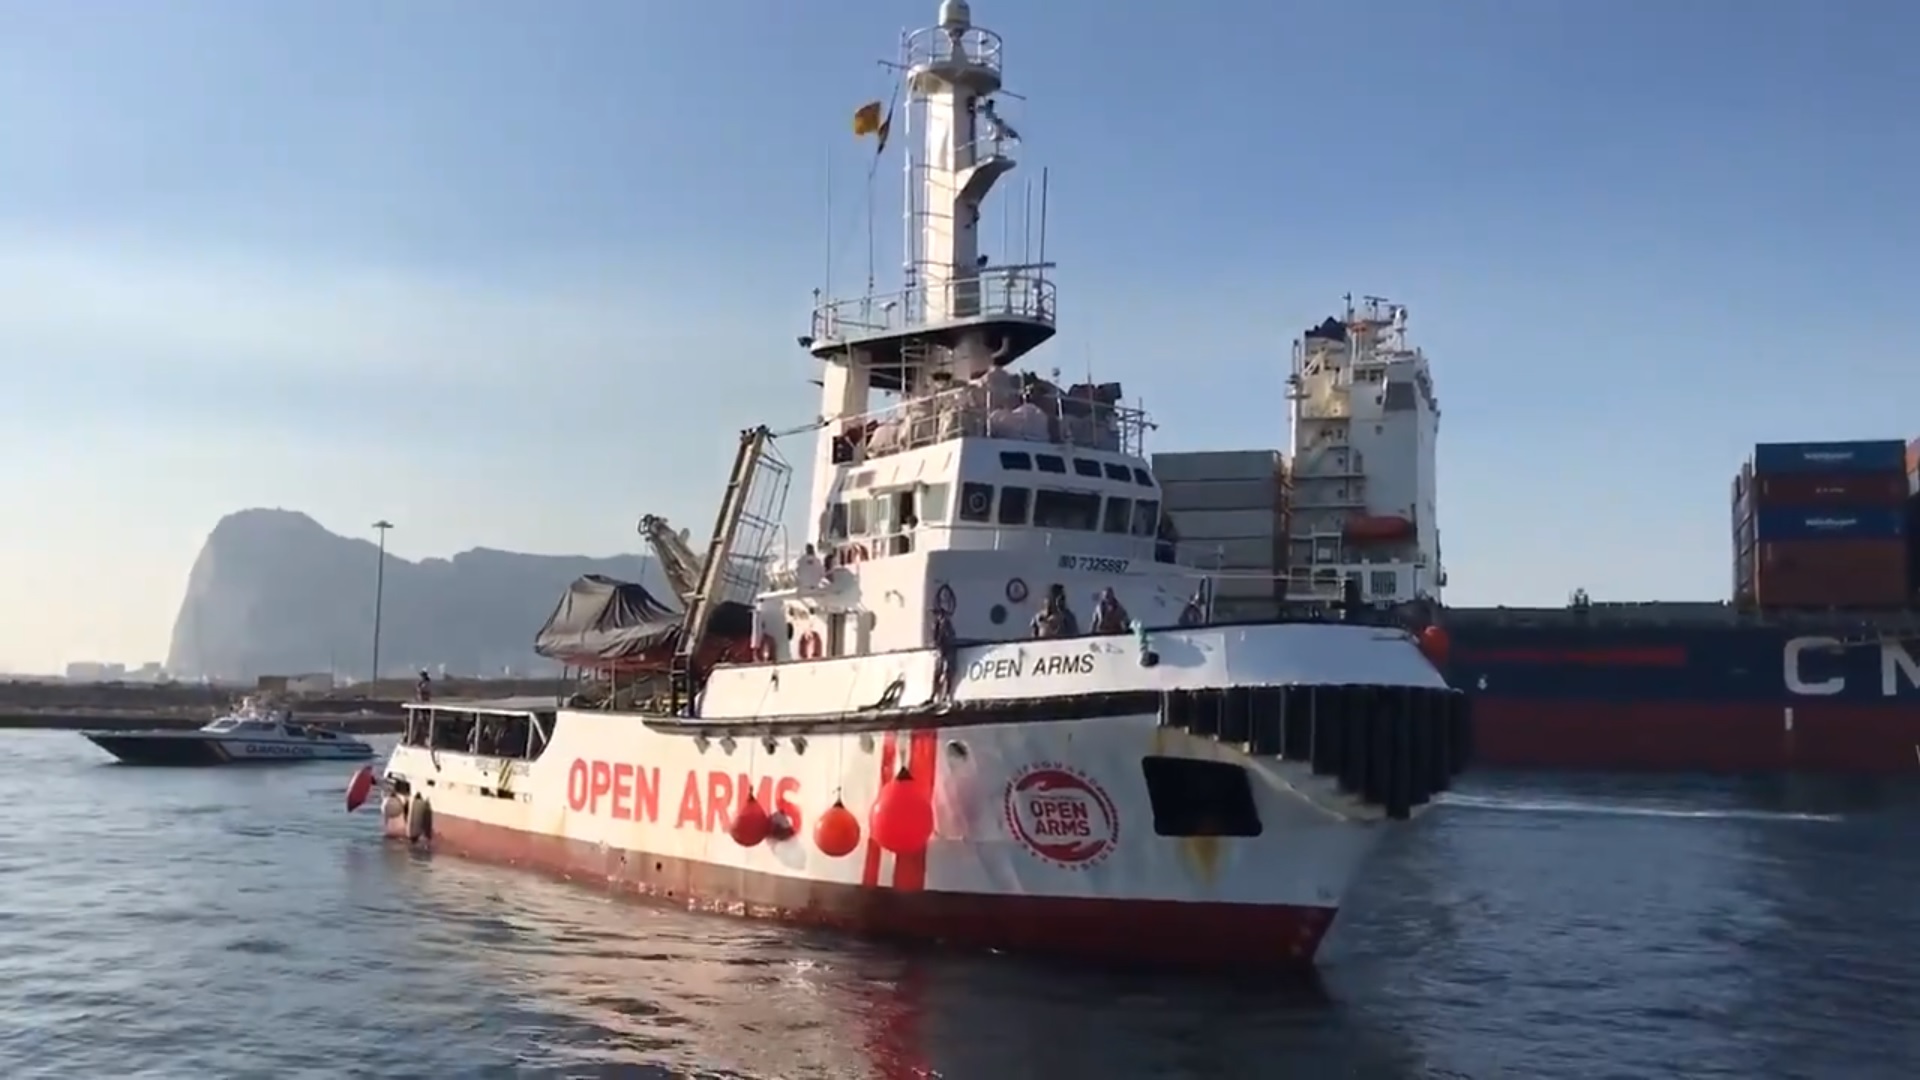 The refugee rescue ship of the Catalan NGO Proactiva Open Arms (by Proactiva Open Arms)